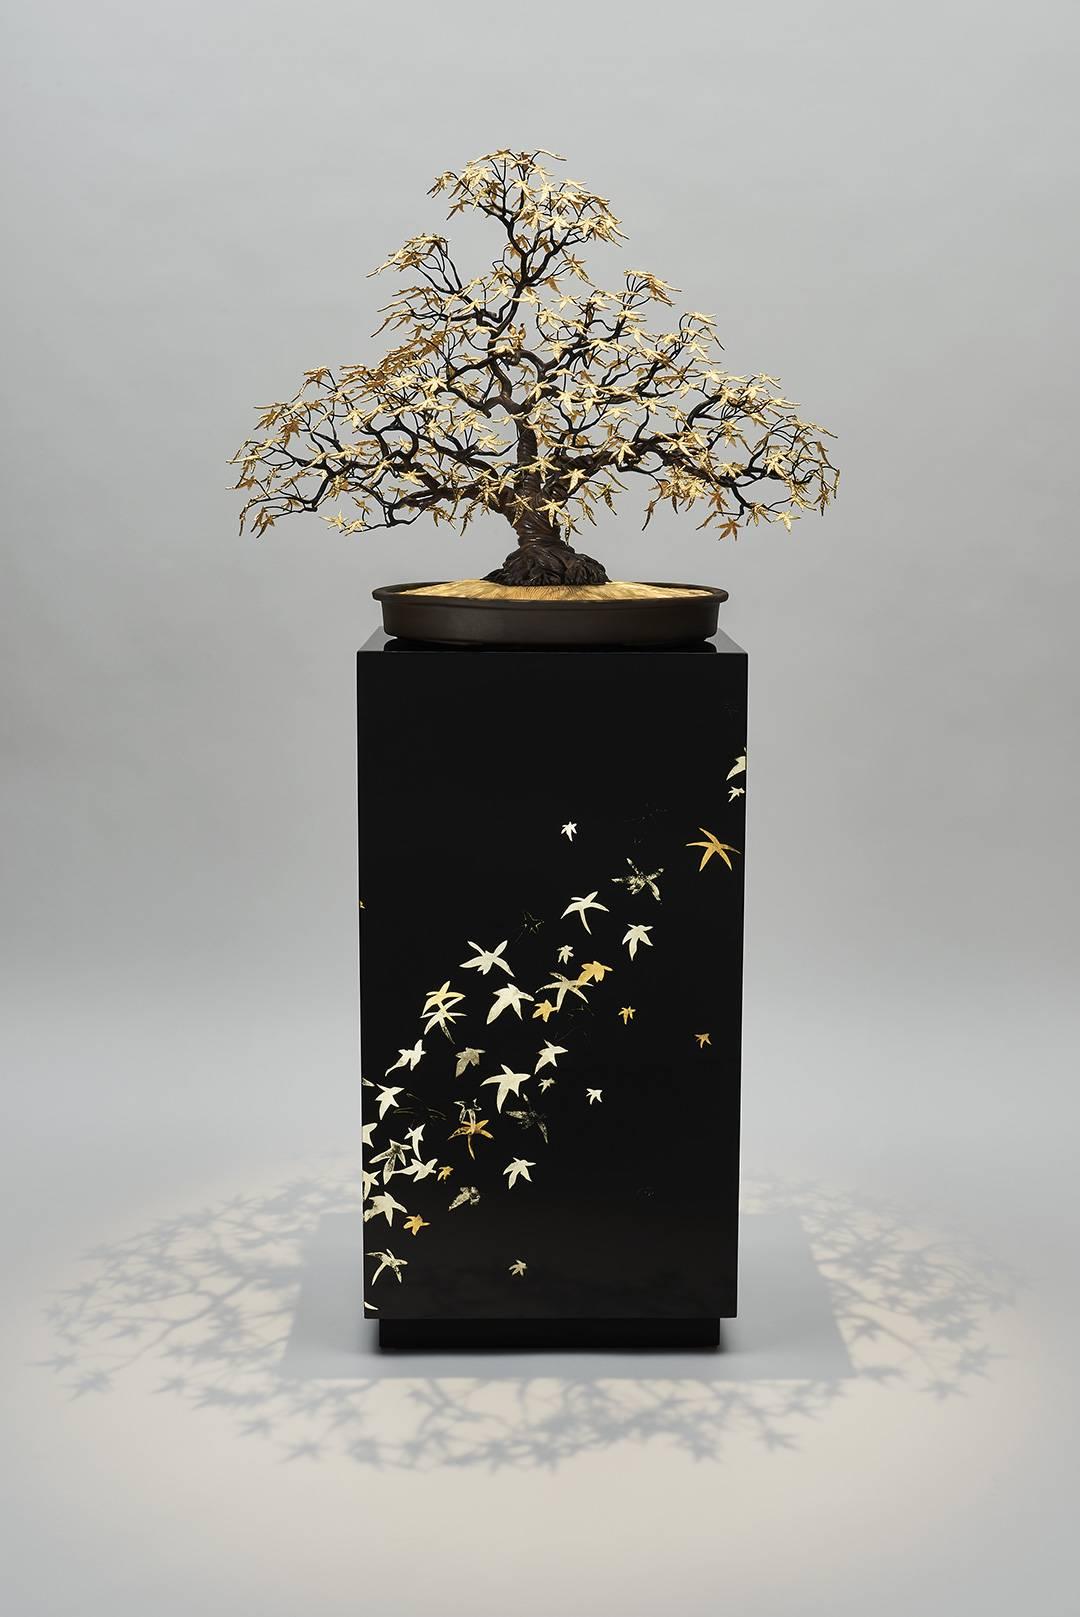 Kossiflore Bonsaï sculpture
Design by Pierre Salagnac, in Tribute to Kossi Aguessy
Traditional Bonzaï terracotta base, covered with brass
Trunk made of brass, with 237 bronze Japanese maple leaves, all removable
Weight: 27 kg.